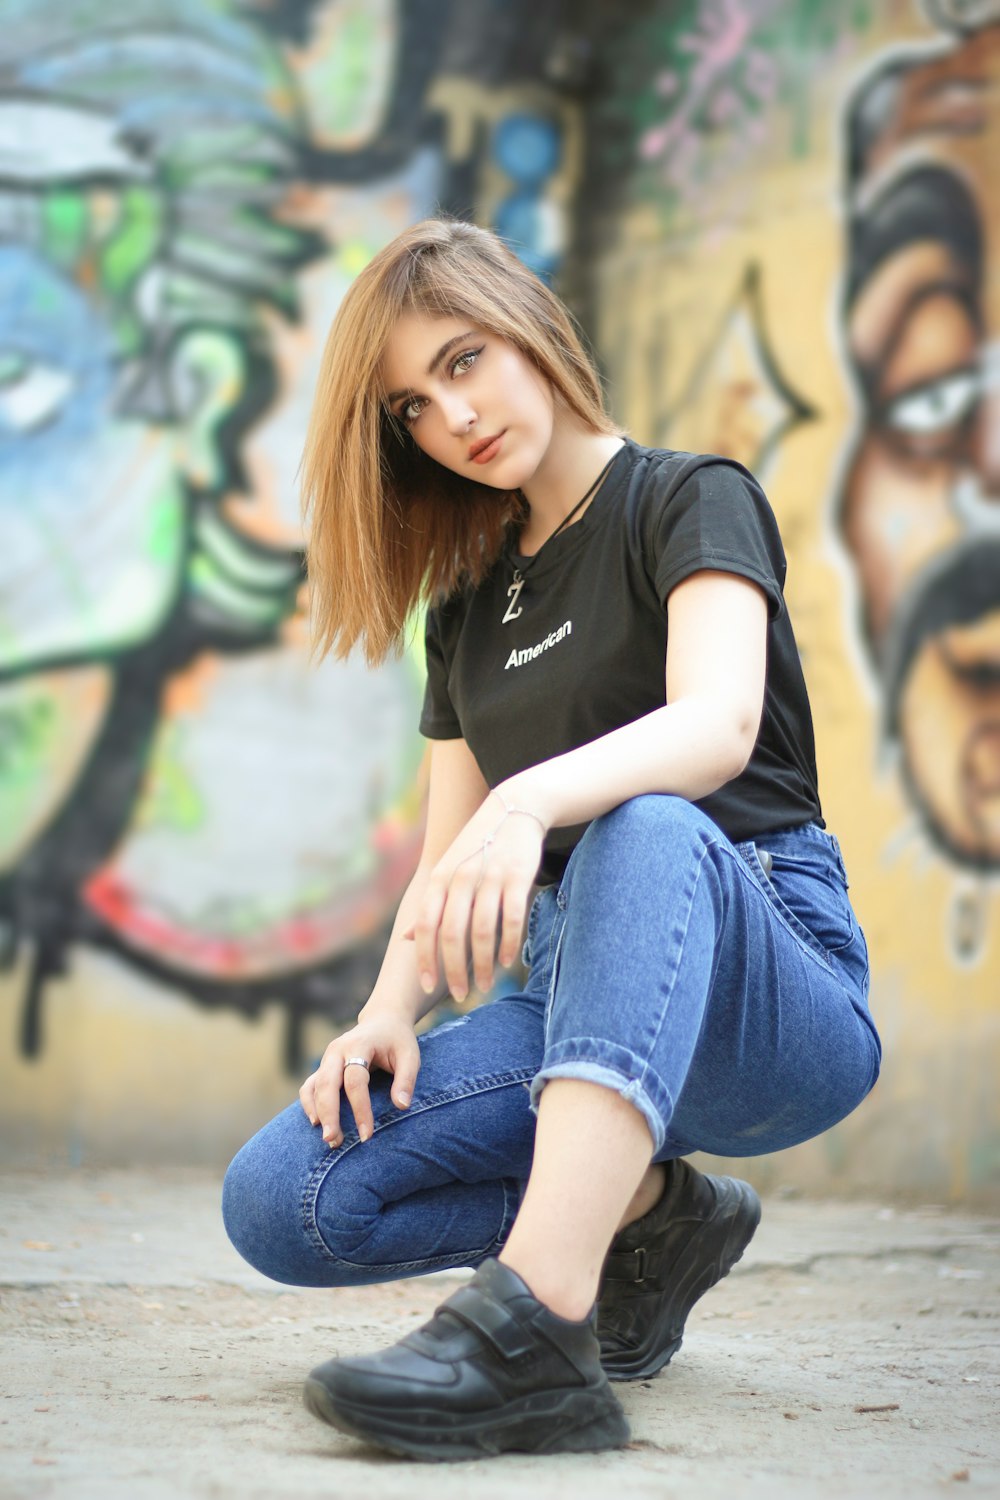 woman in black shirt and blue denim jeans sitting on concrete floor